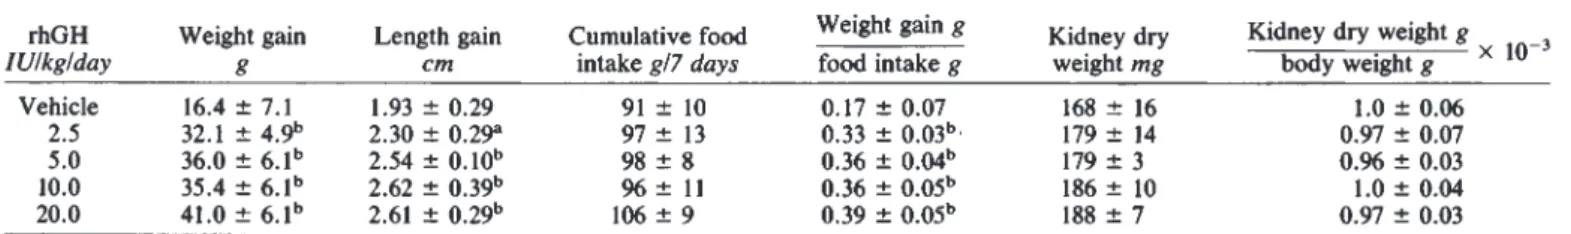 Table 1. Dose dependent effect of rhGH for seven days on growth in SD rats rhGH lU/kg/day Weight gain g Length gaincm Cumulative foodintake g/7 days Weight gain g